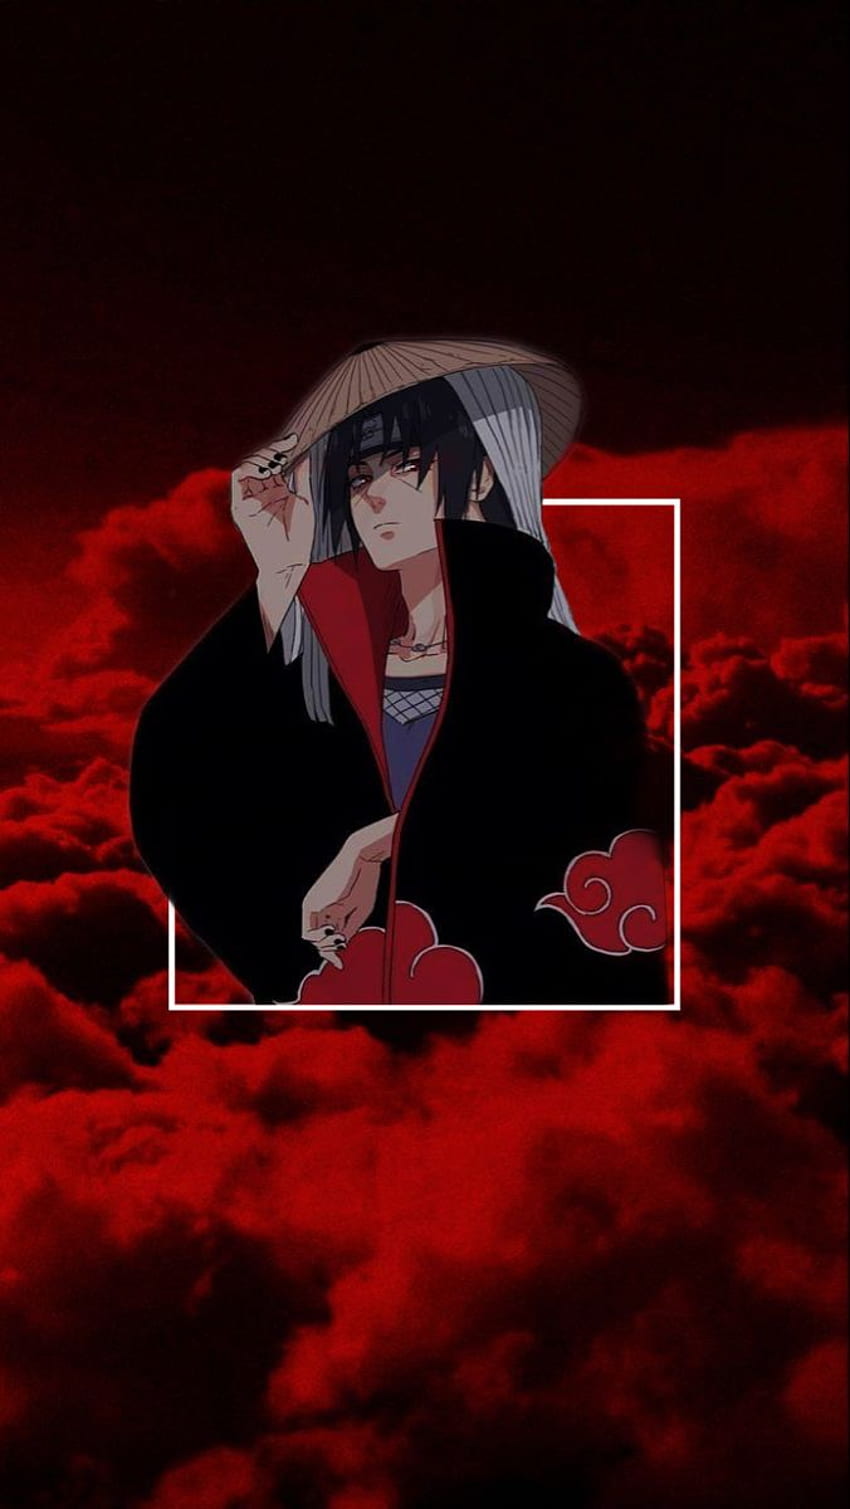 Itachi phone / Naruto in 2021. Anime character design, Red and black , Anime drawing styles HD電話の壁紙